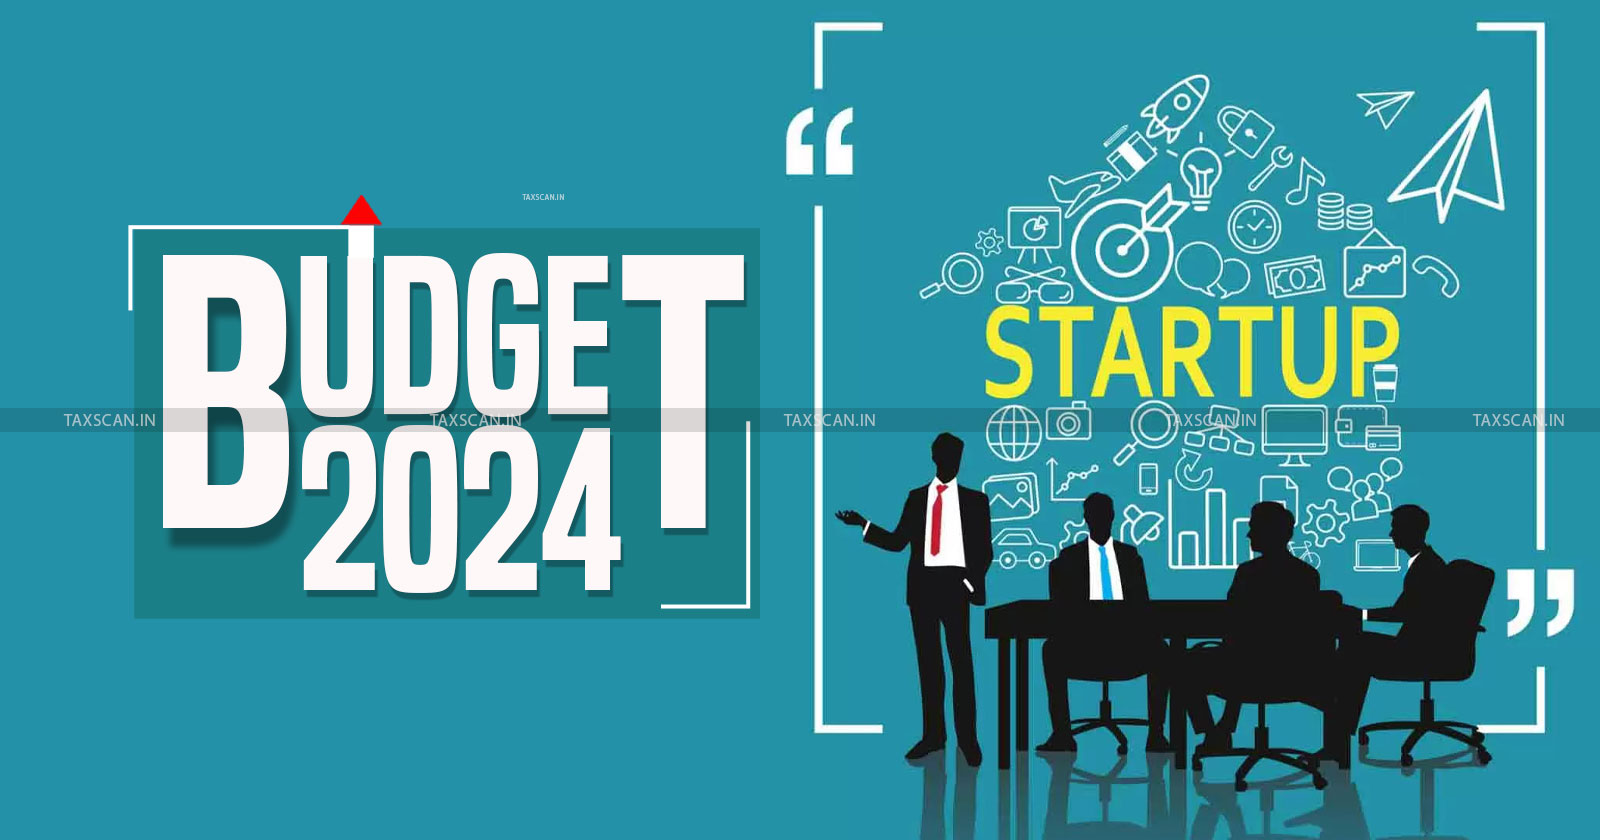 Budget 2024 - Interim Budget 2024 - Income Tax Benefit - Budget 2024 for startup - Tax Exemption - taxscan